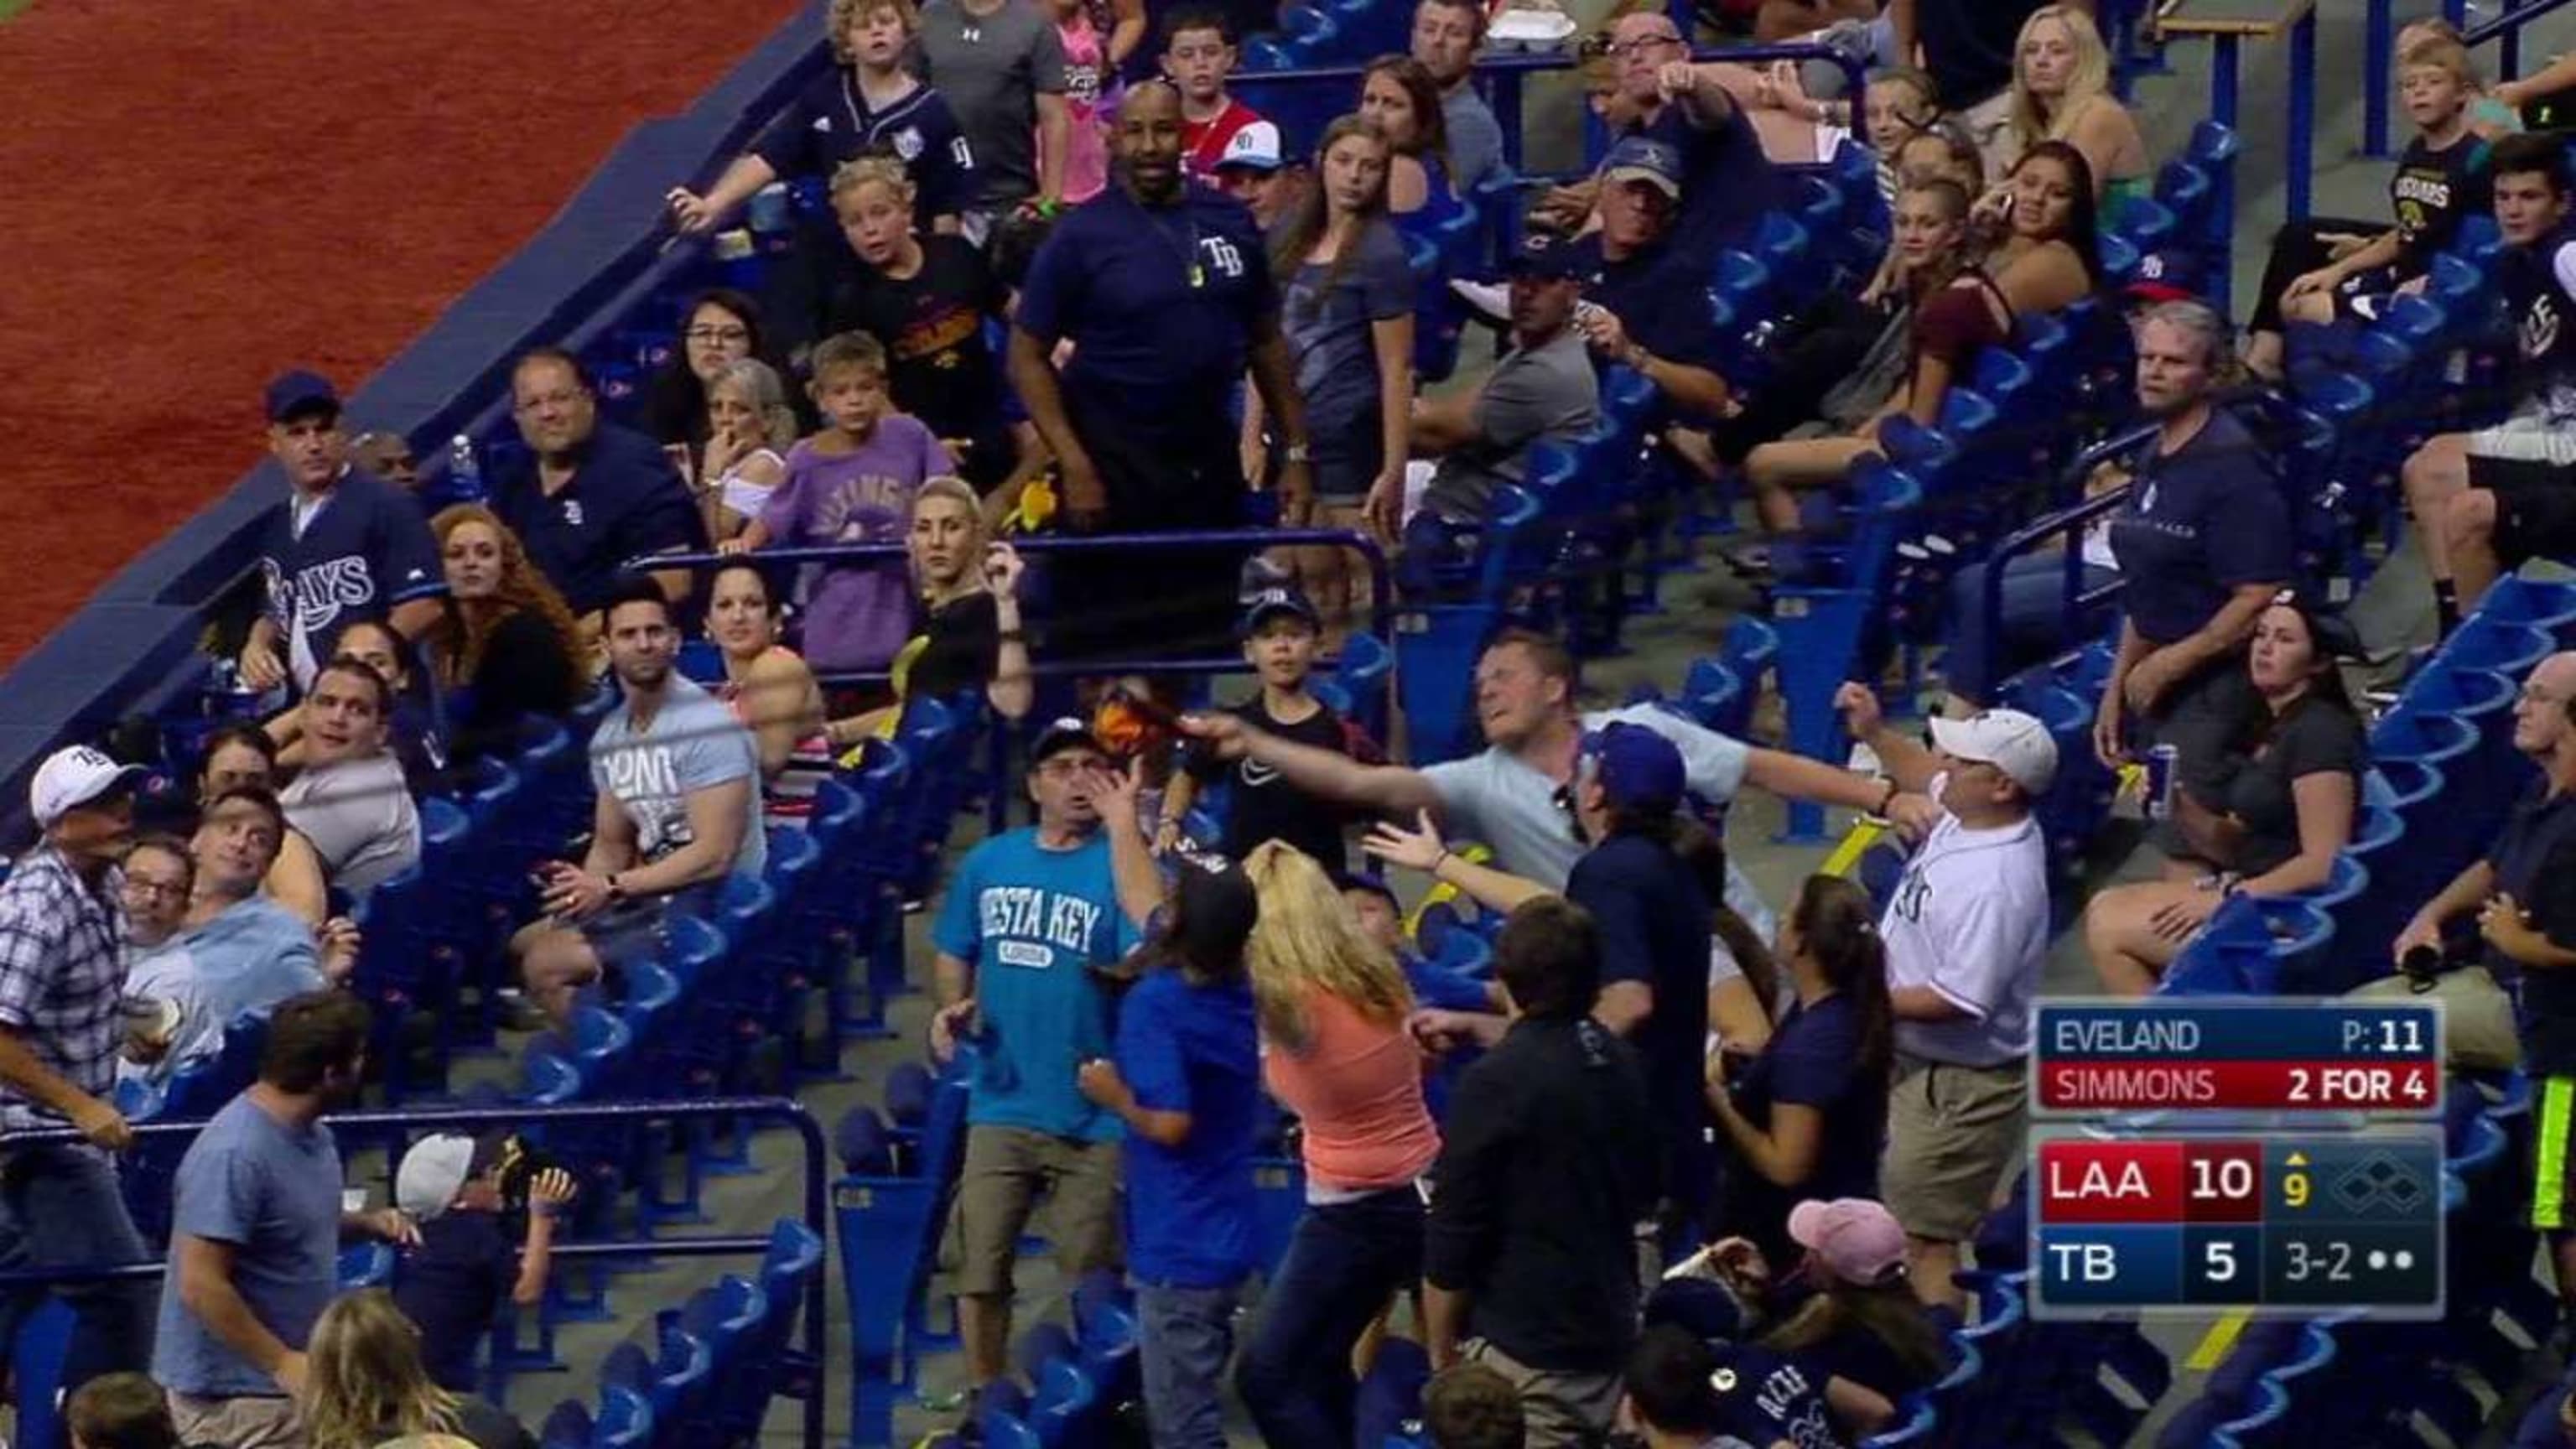 Yankees Fan Catches A Foul Ball, Celebrates For About Five Freakin' Hours